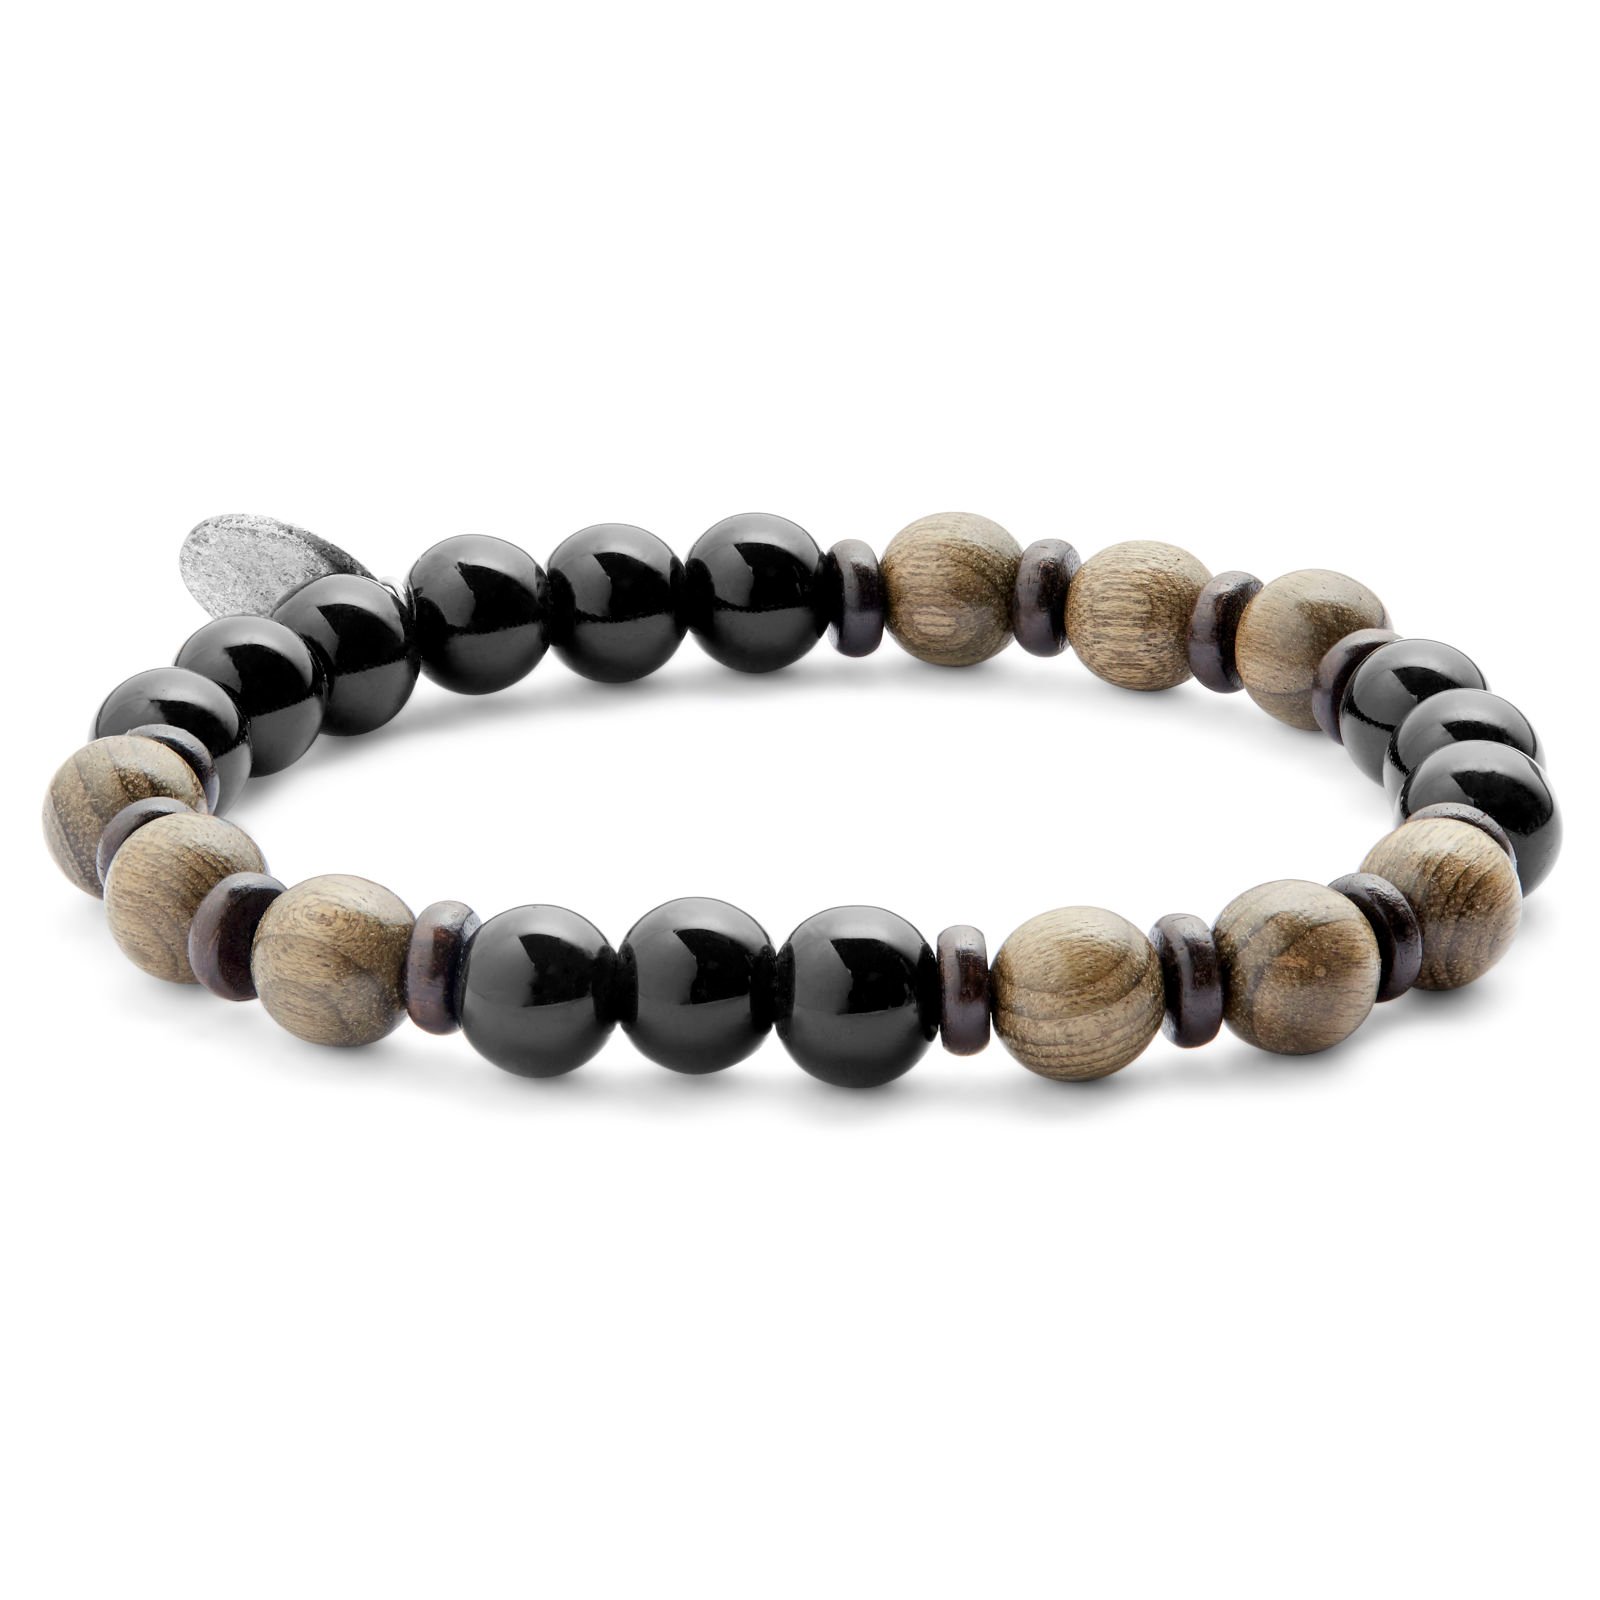 Which Are The Best Luxury Bracelets For Men?